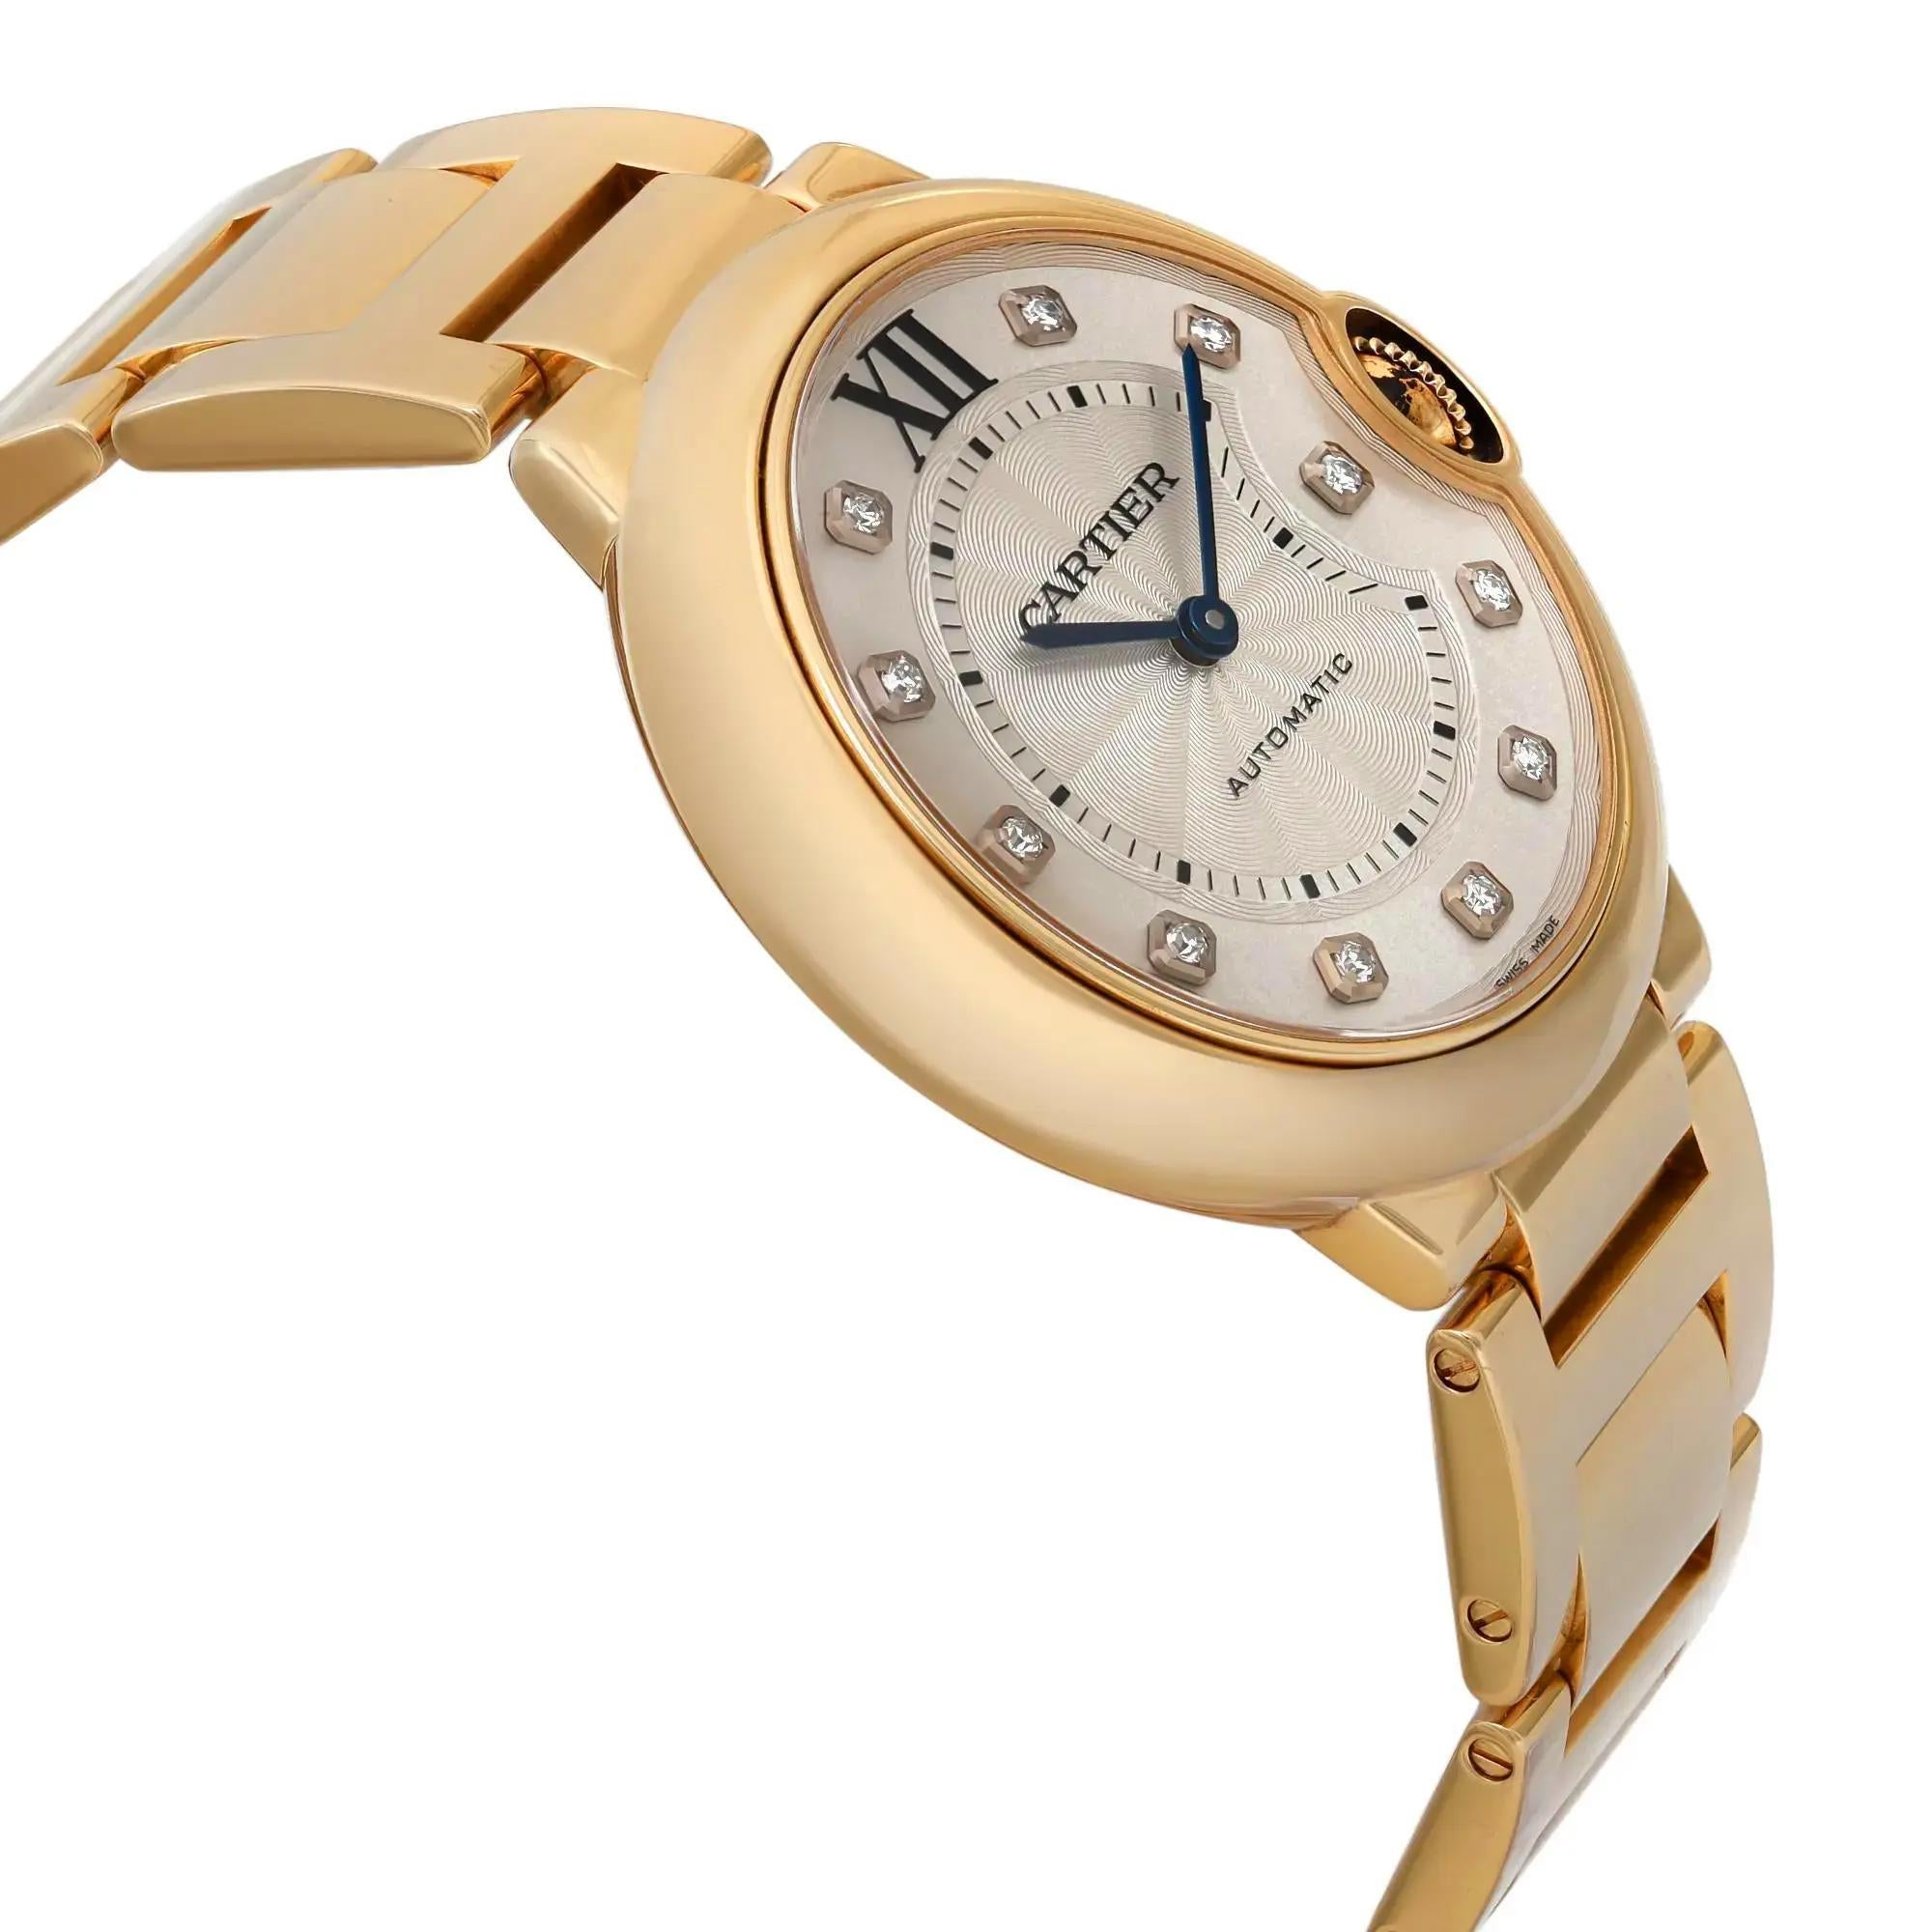 Cartier Ballon Bleu 18K Yellow Gold Silver Diamond Dial Ladies Watch WE902027 In Excellent Condition For Sale In New York, NY